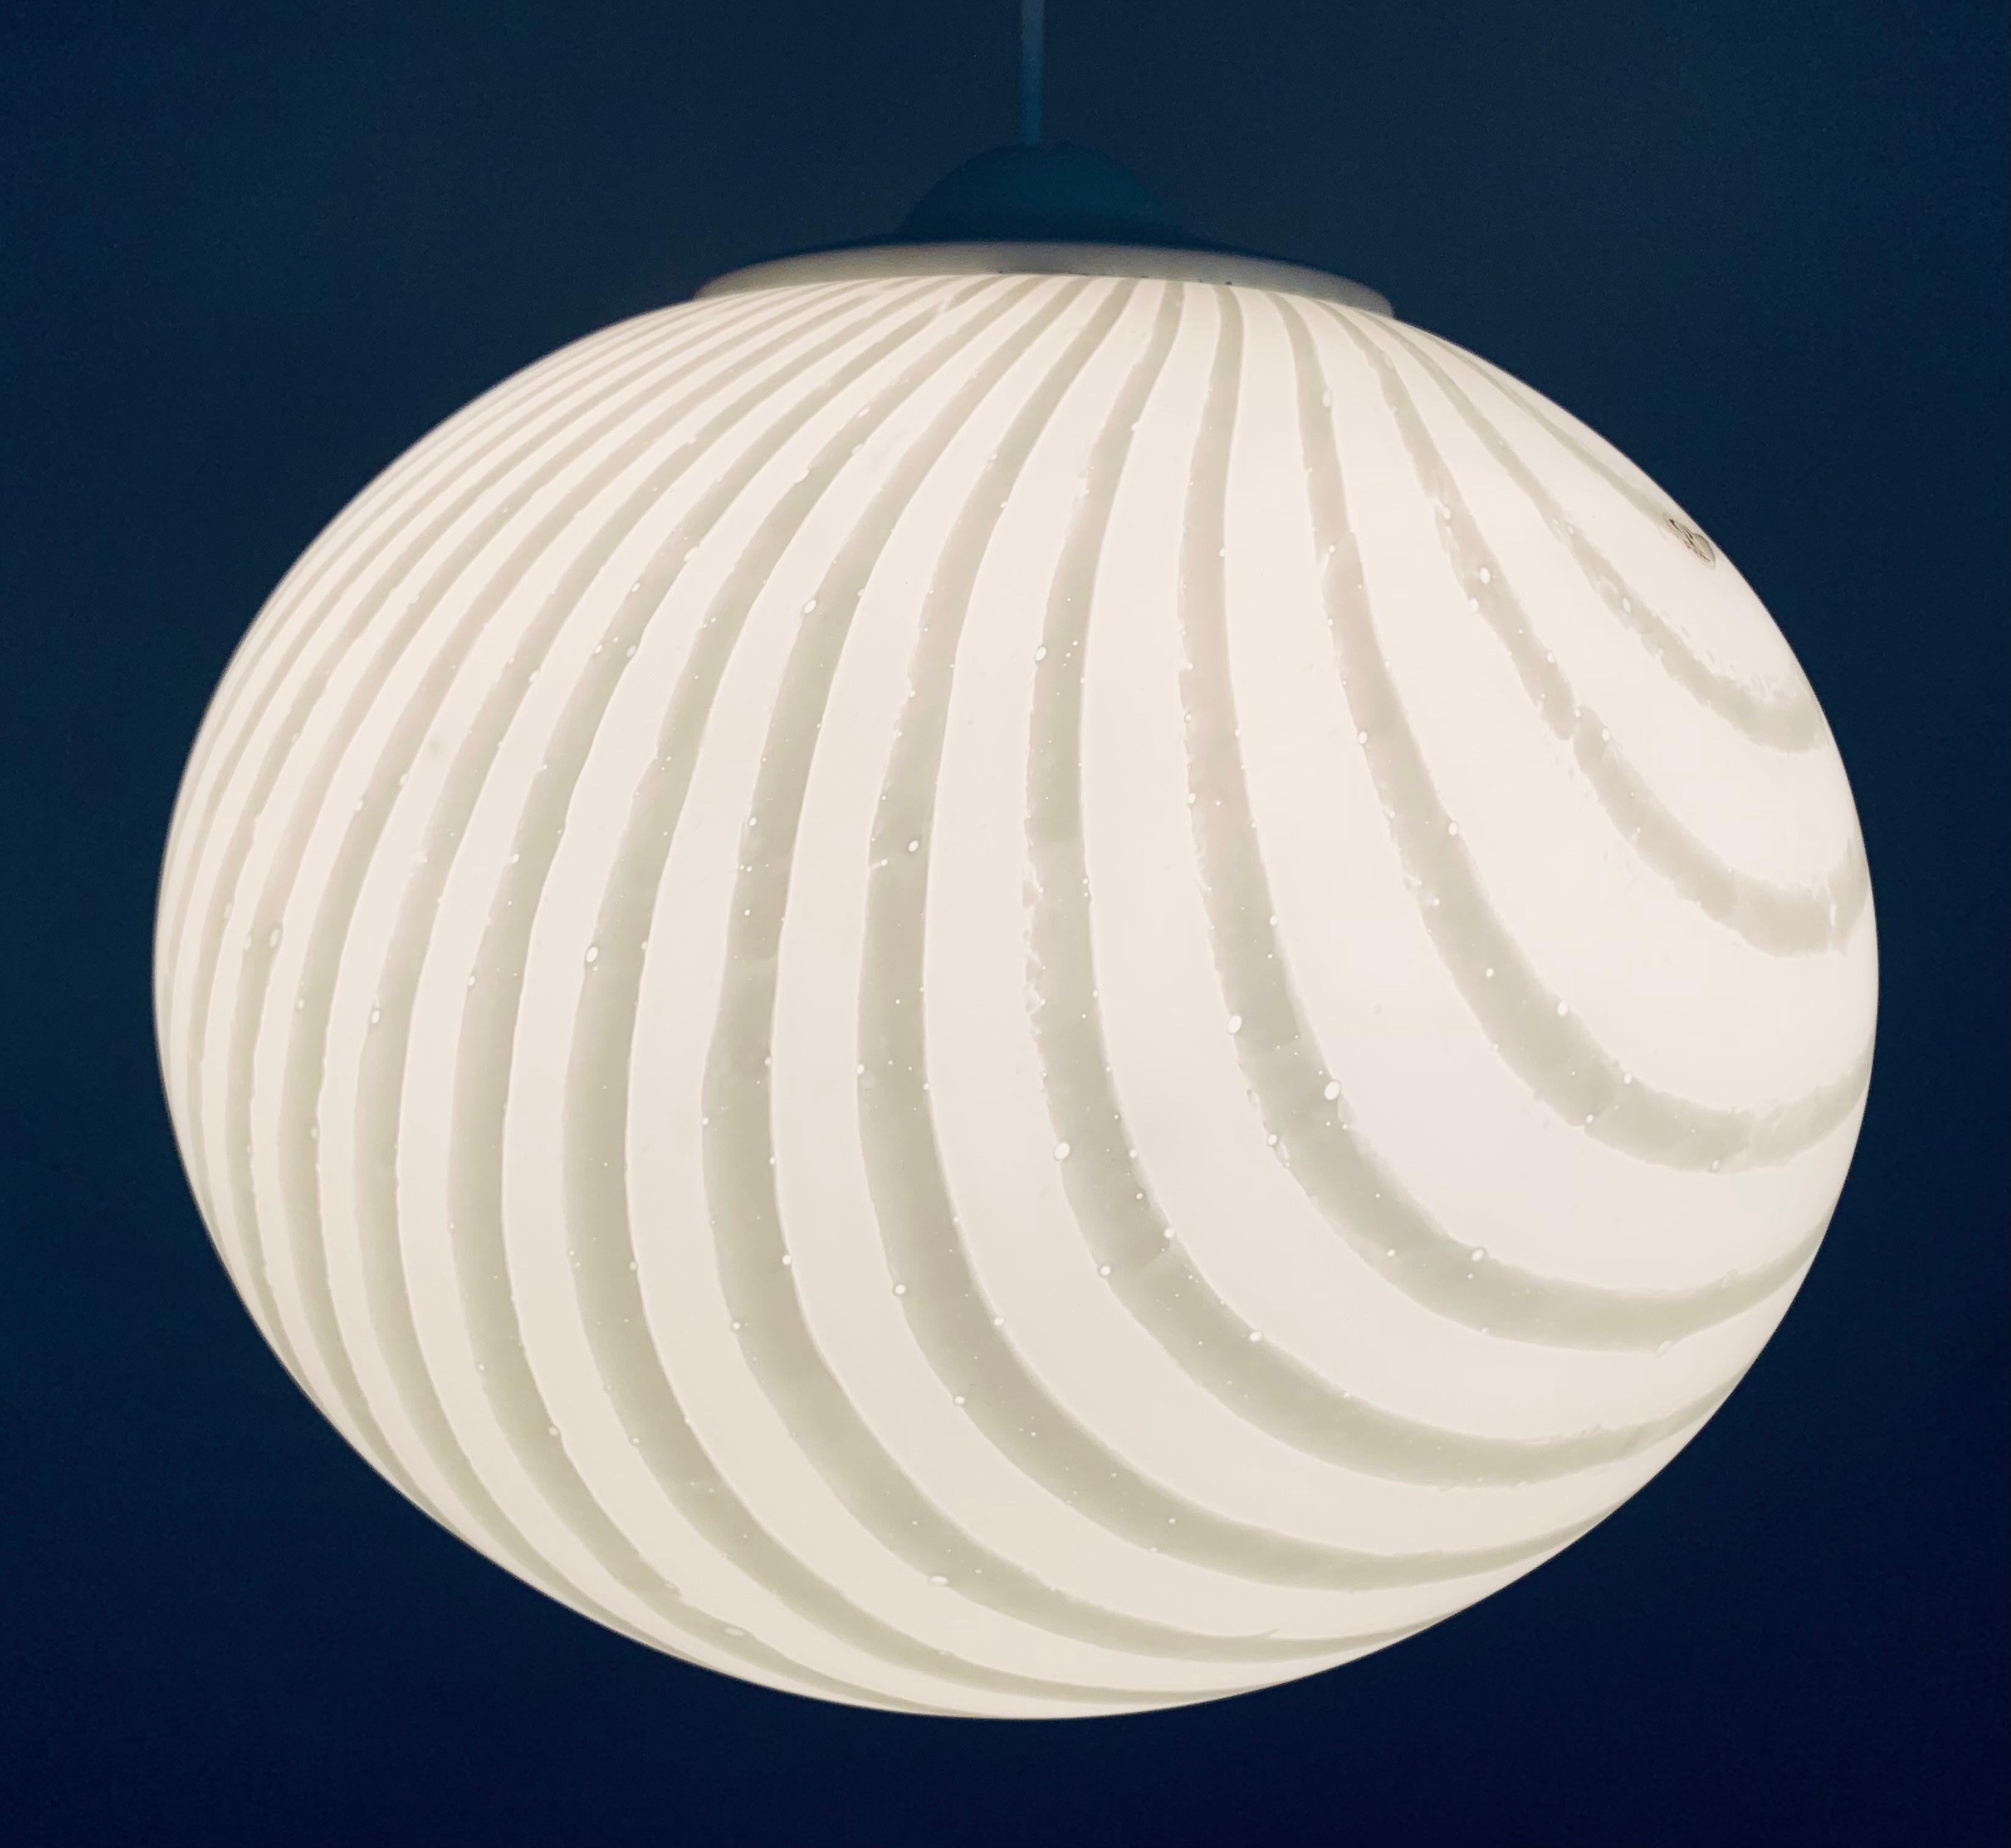 1970s German Peill & Putzler opaline hanging light. The globe specifically when lit has vibrant lines of a darker shade of white running around its surface. The globe is supported by a white bulb socket holder and held into place with three sliding